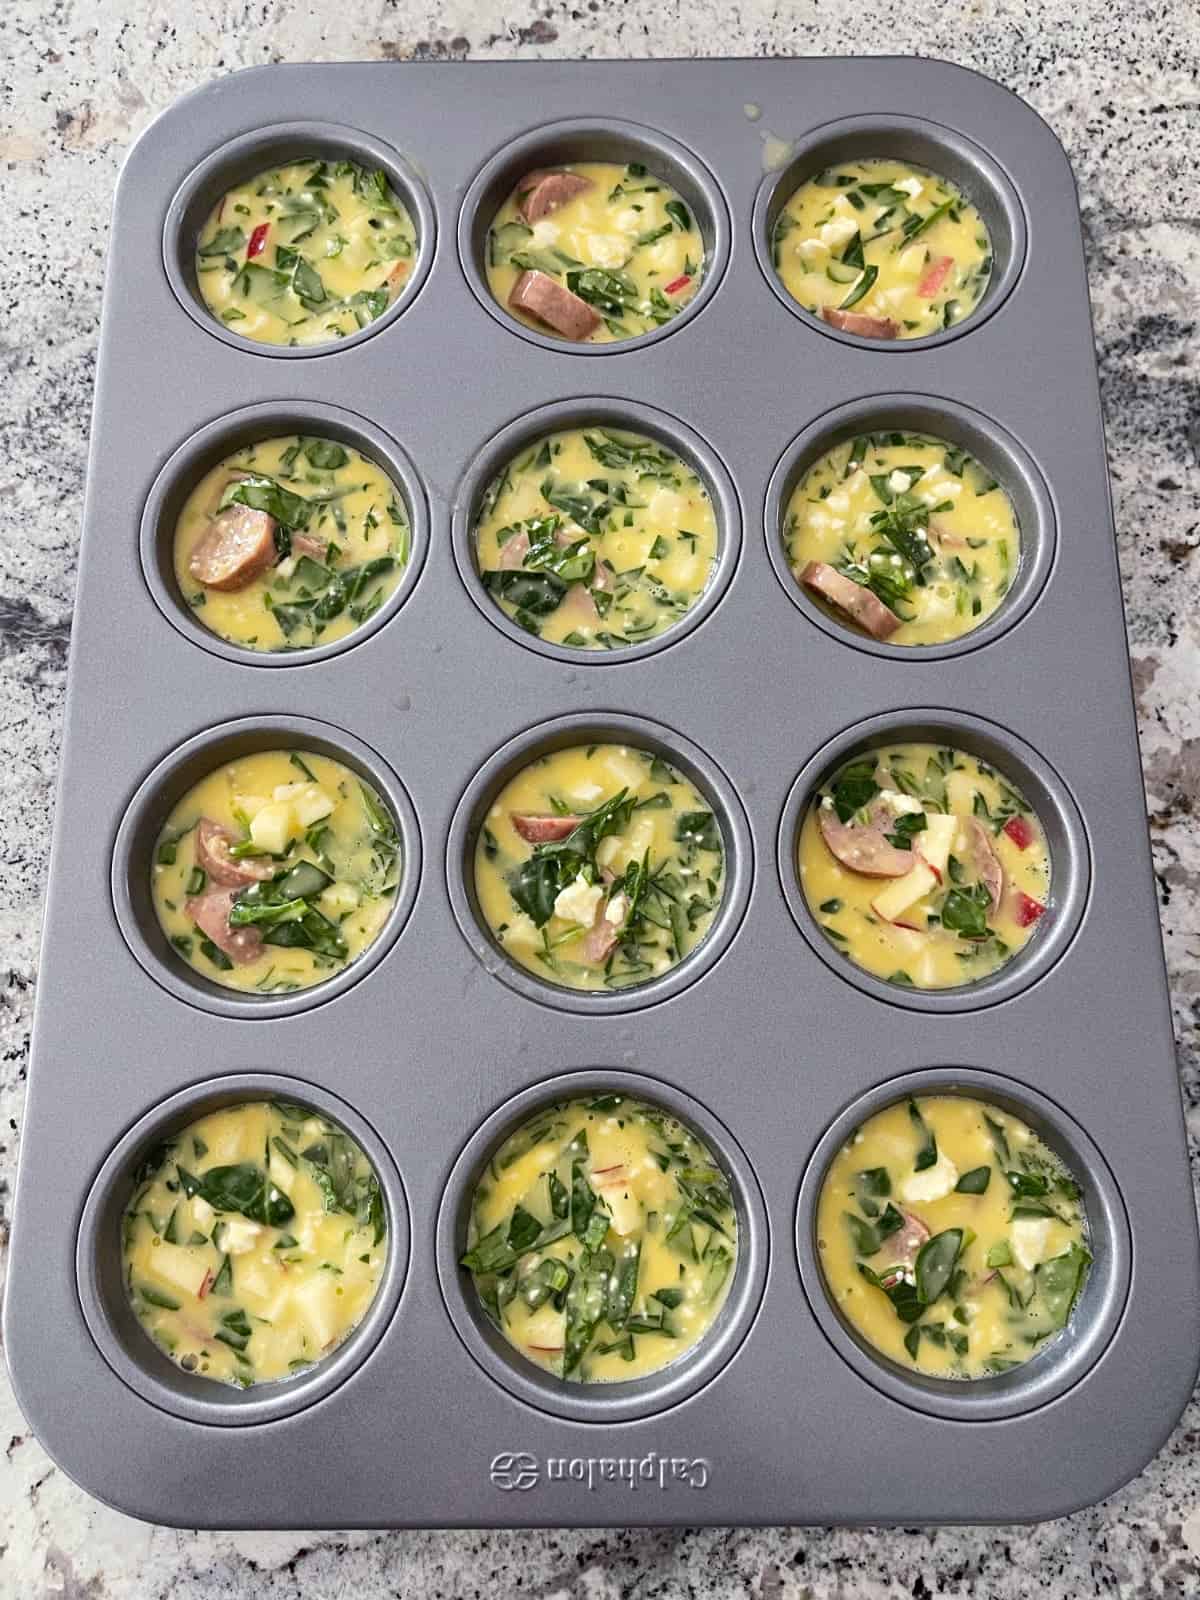 Unbaked apple chicken sausage egg bakes in muffin tin on granite counter.